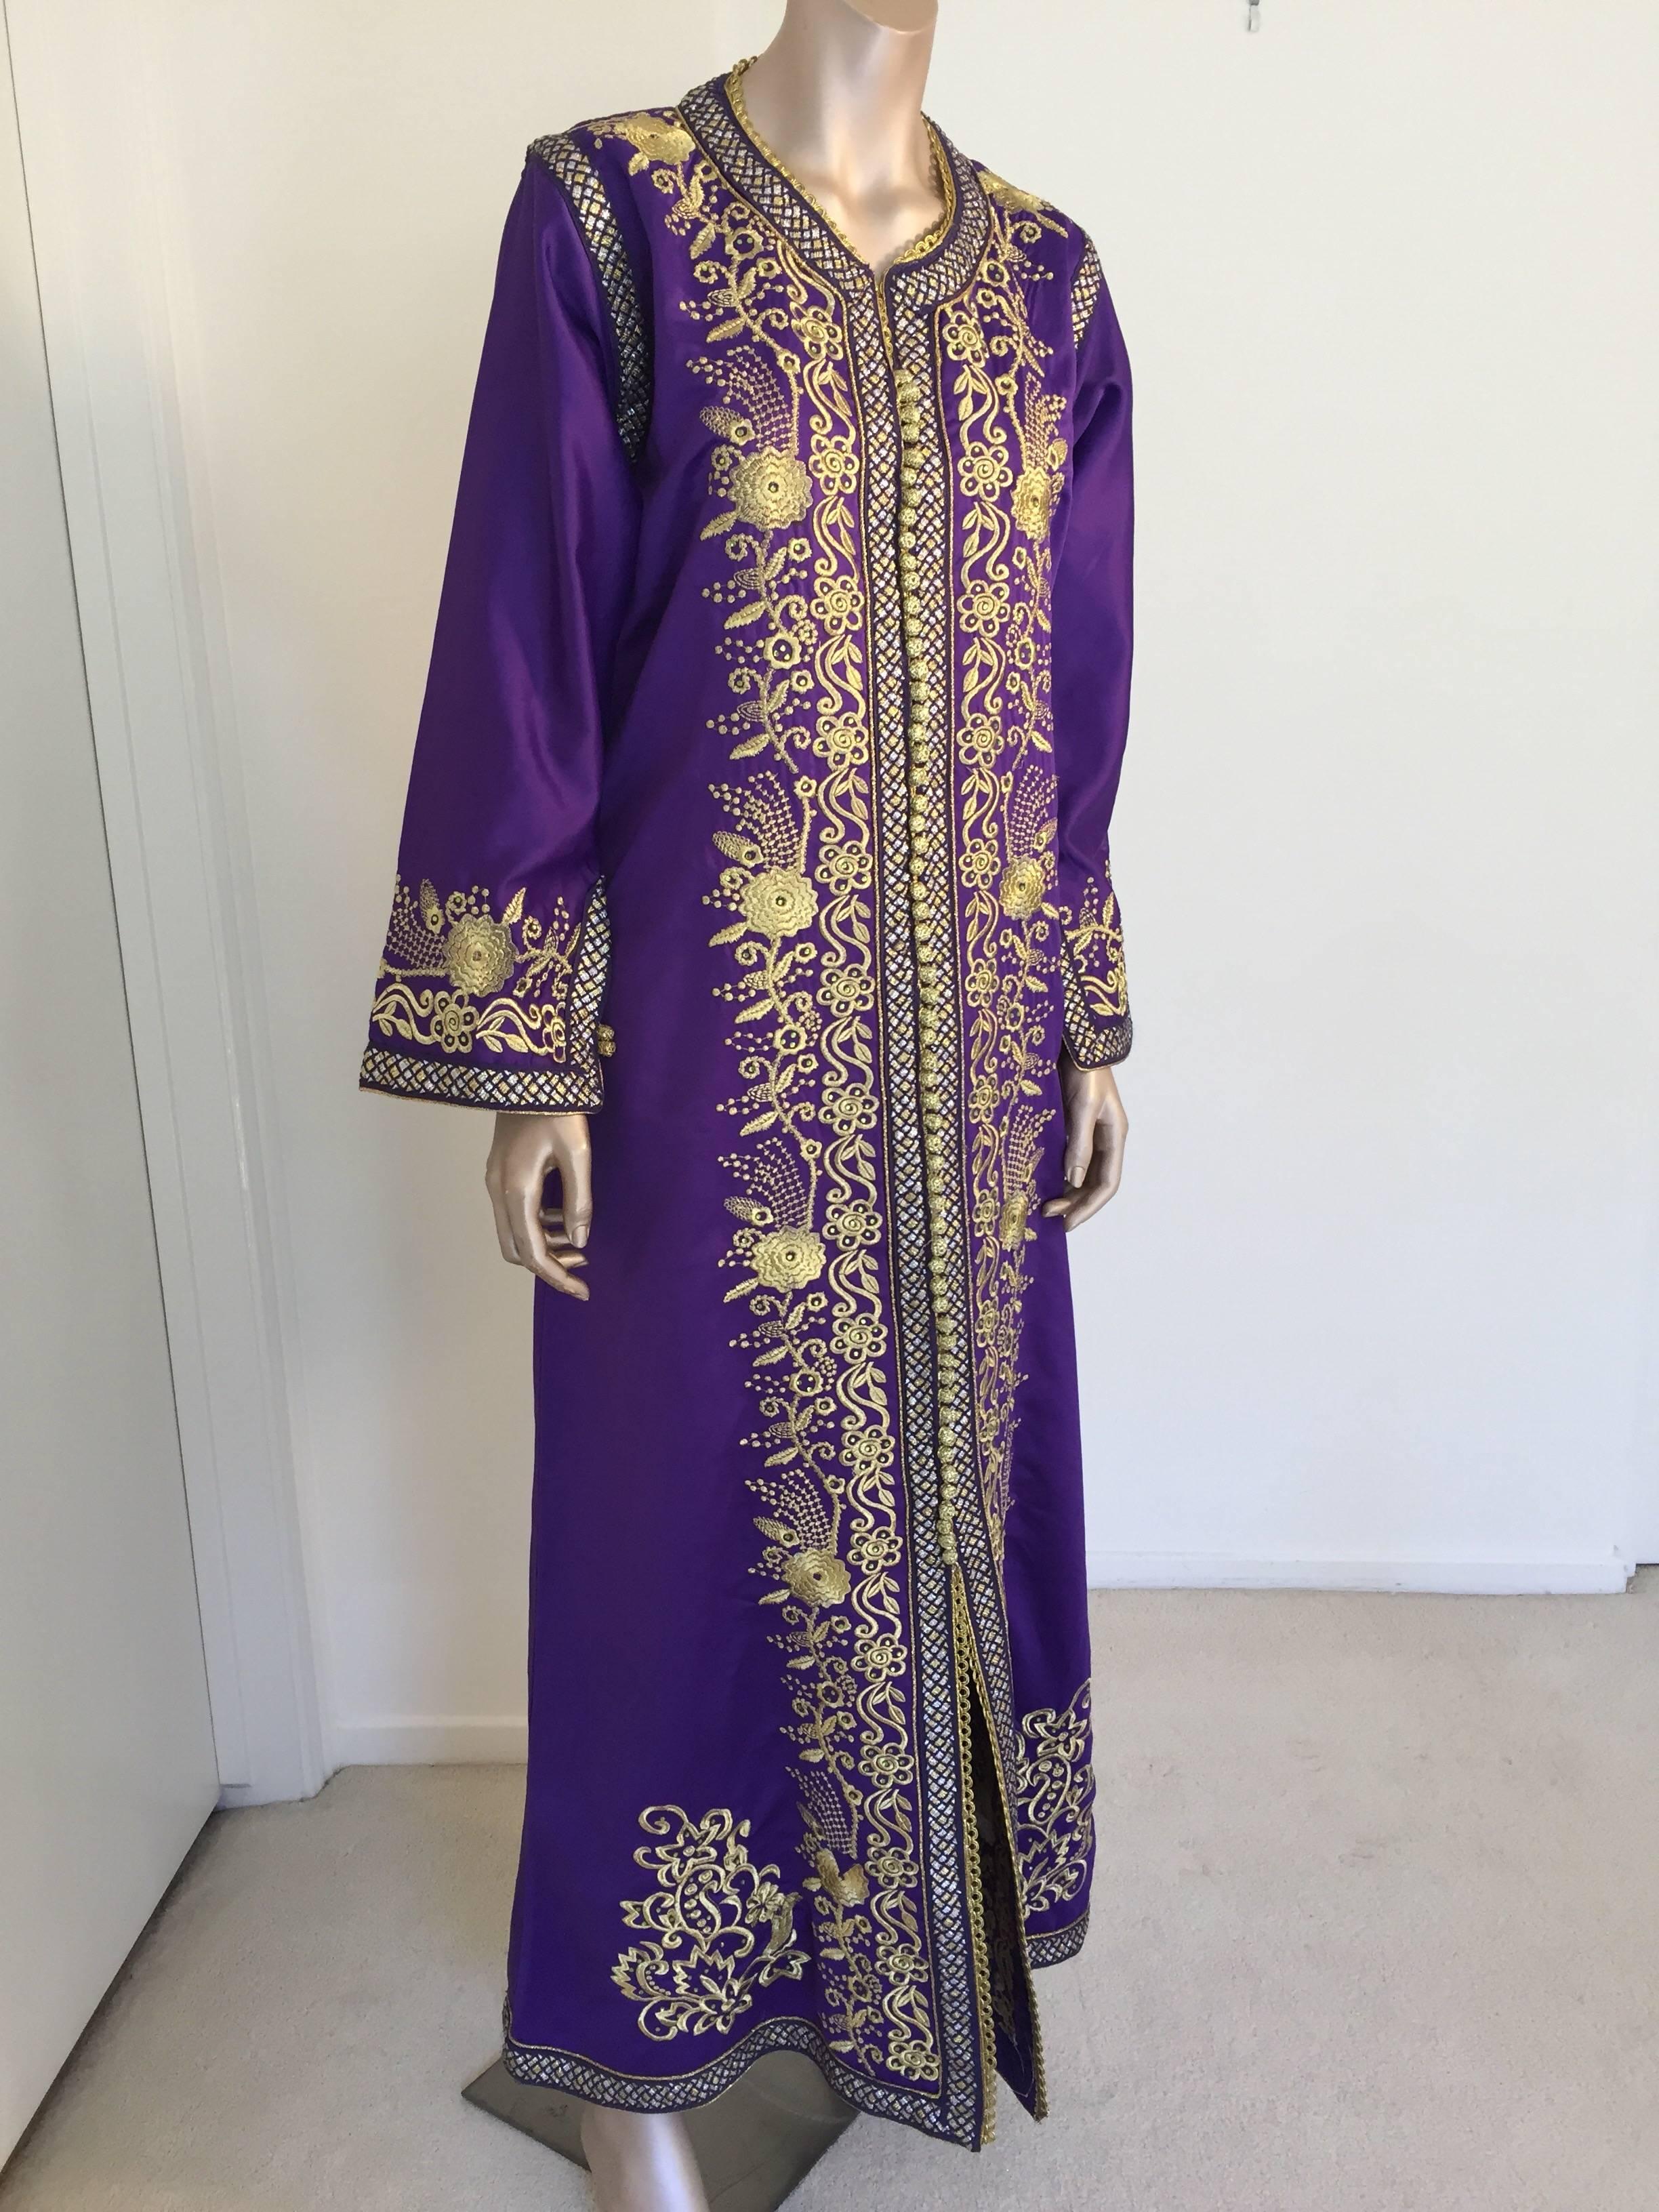 Elegant vintage designer Moroccan kaftan, purple satin embroidered with gold.
This chic Gypsy Bohemian maxi dress kaftan is embroidered and embellished with gold and silver metallic thread. 
One of a kind evening Moroccan Middle Eastern